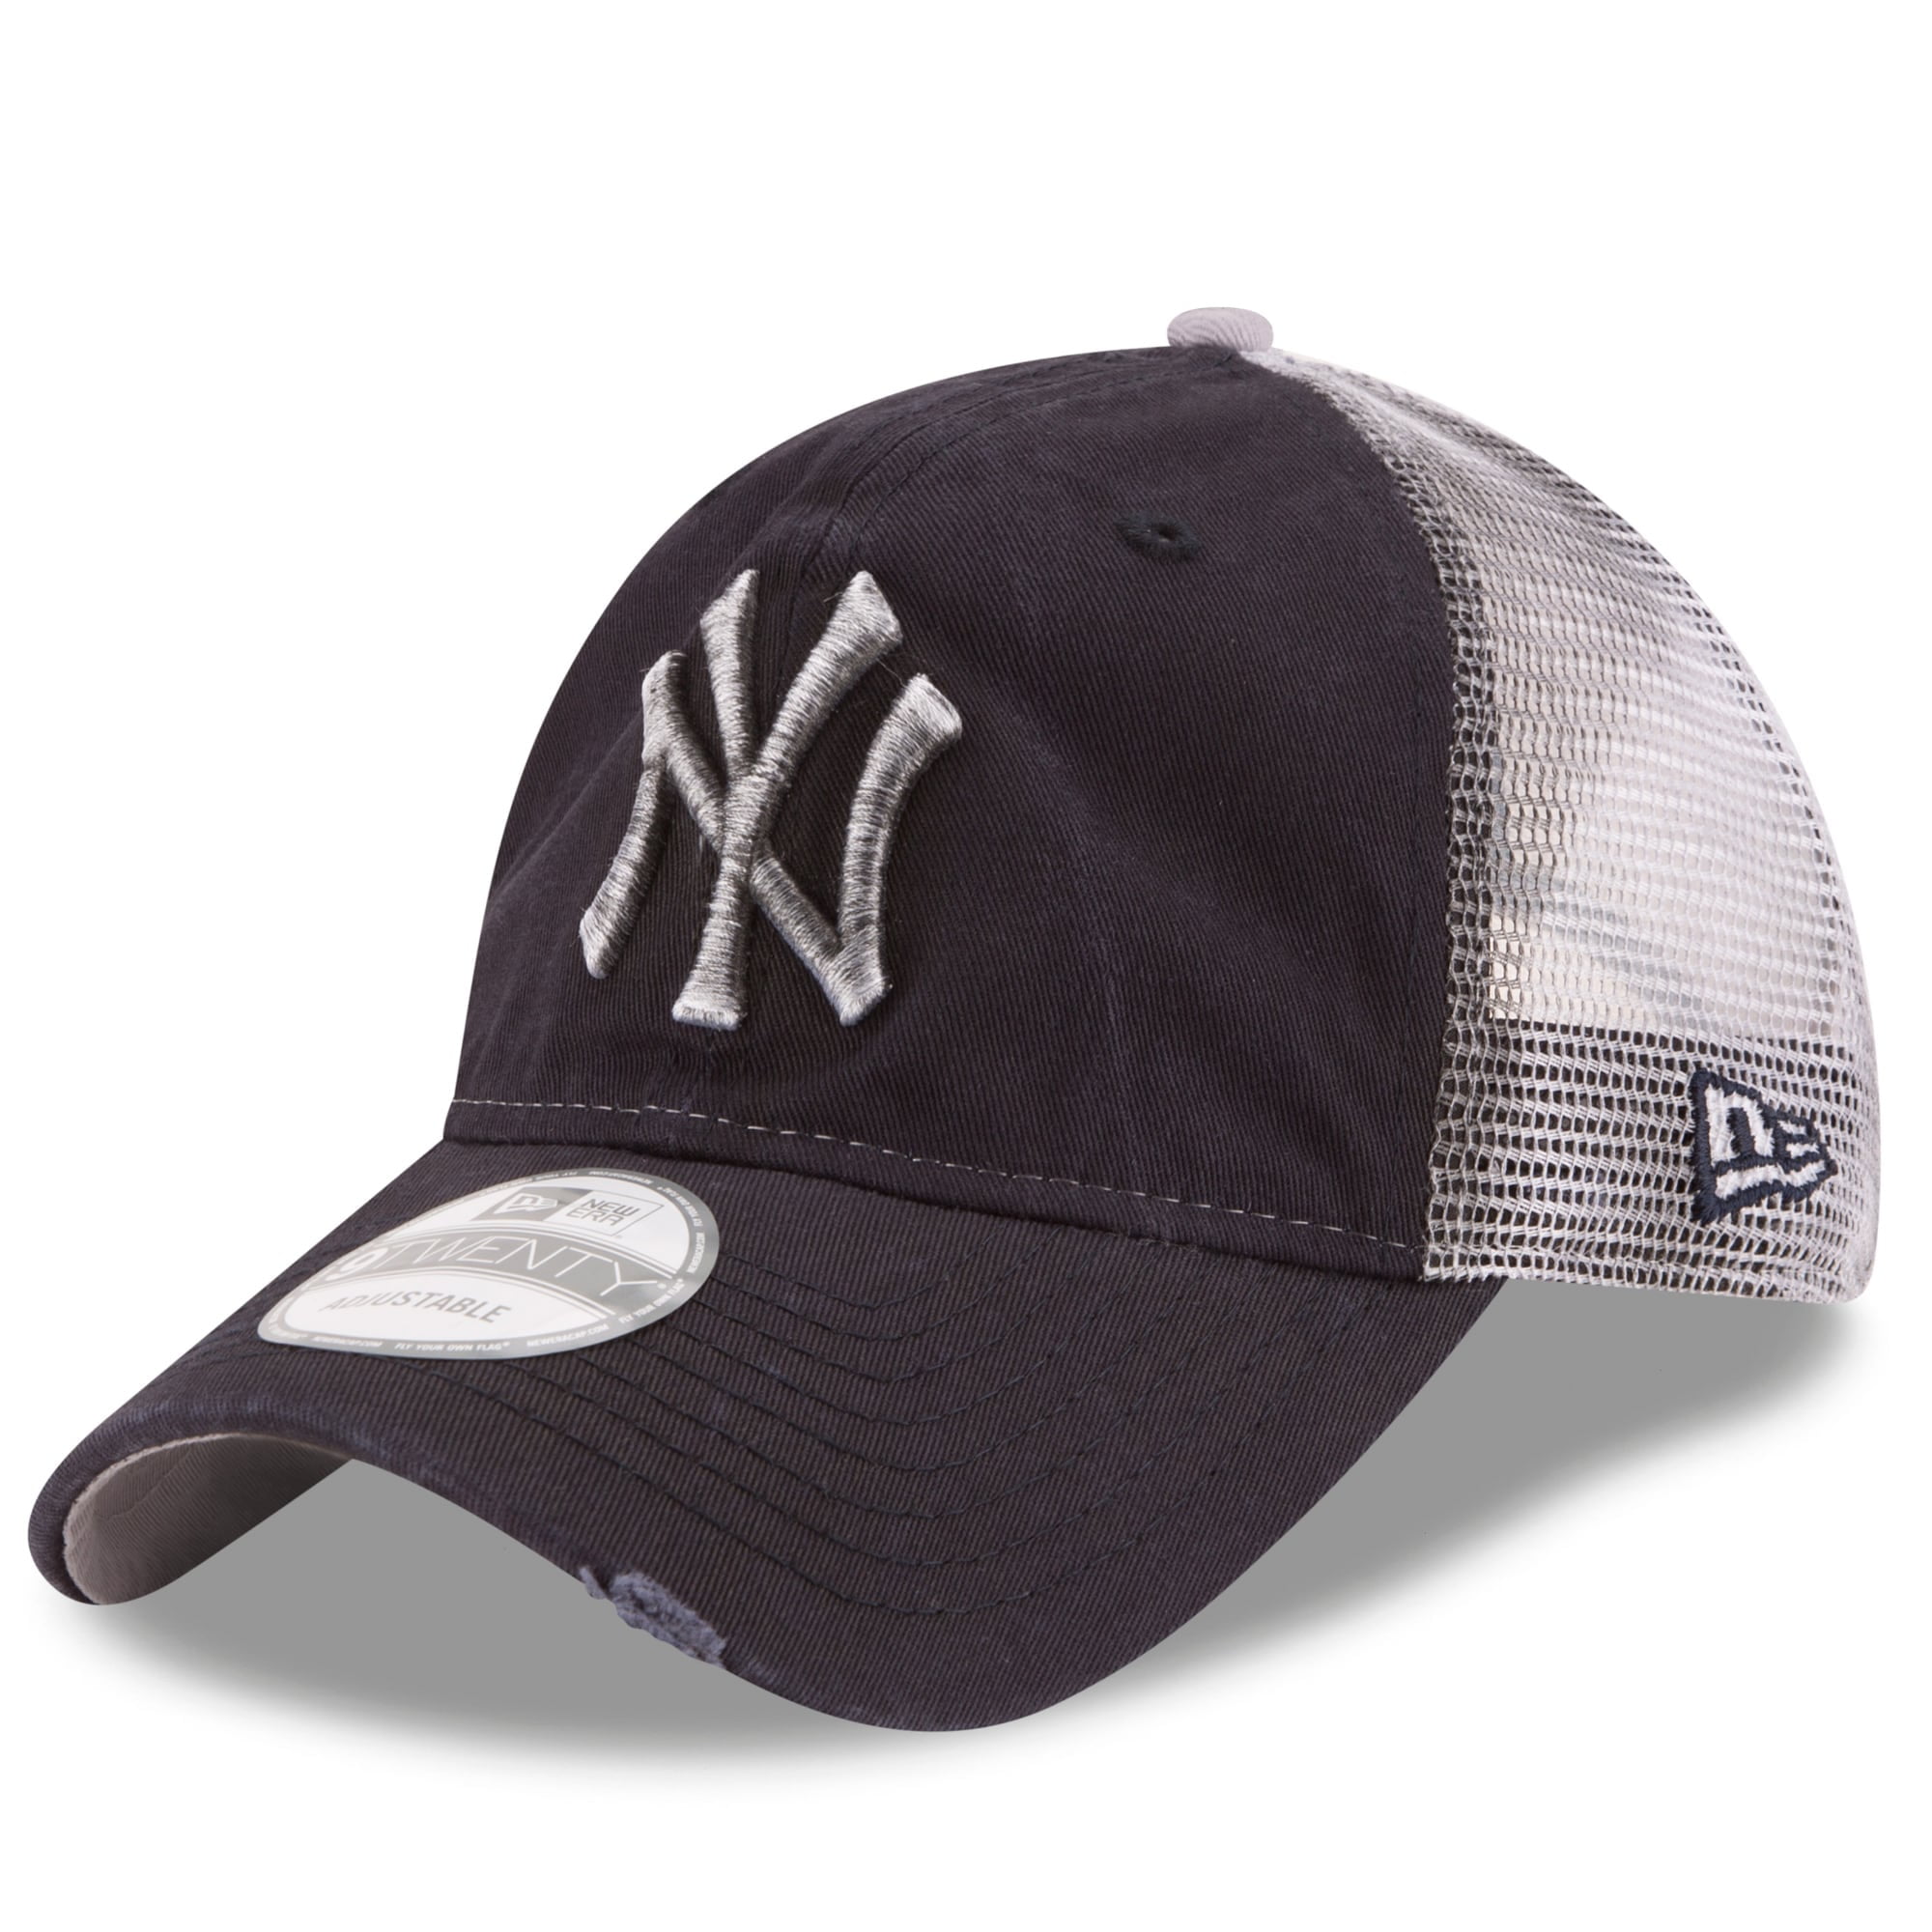 Men's New Era Navy New York Yankees Authentic Collection On Field 